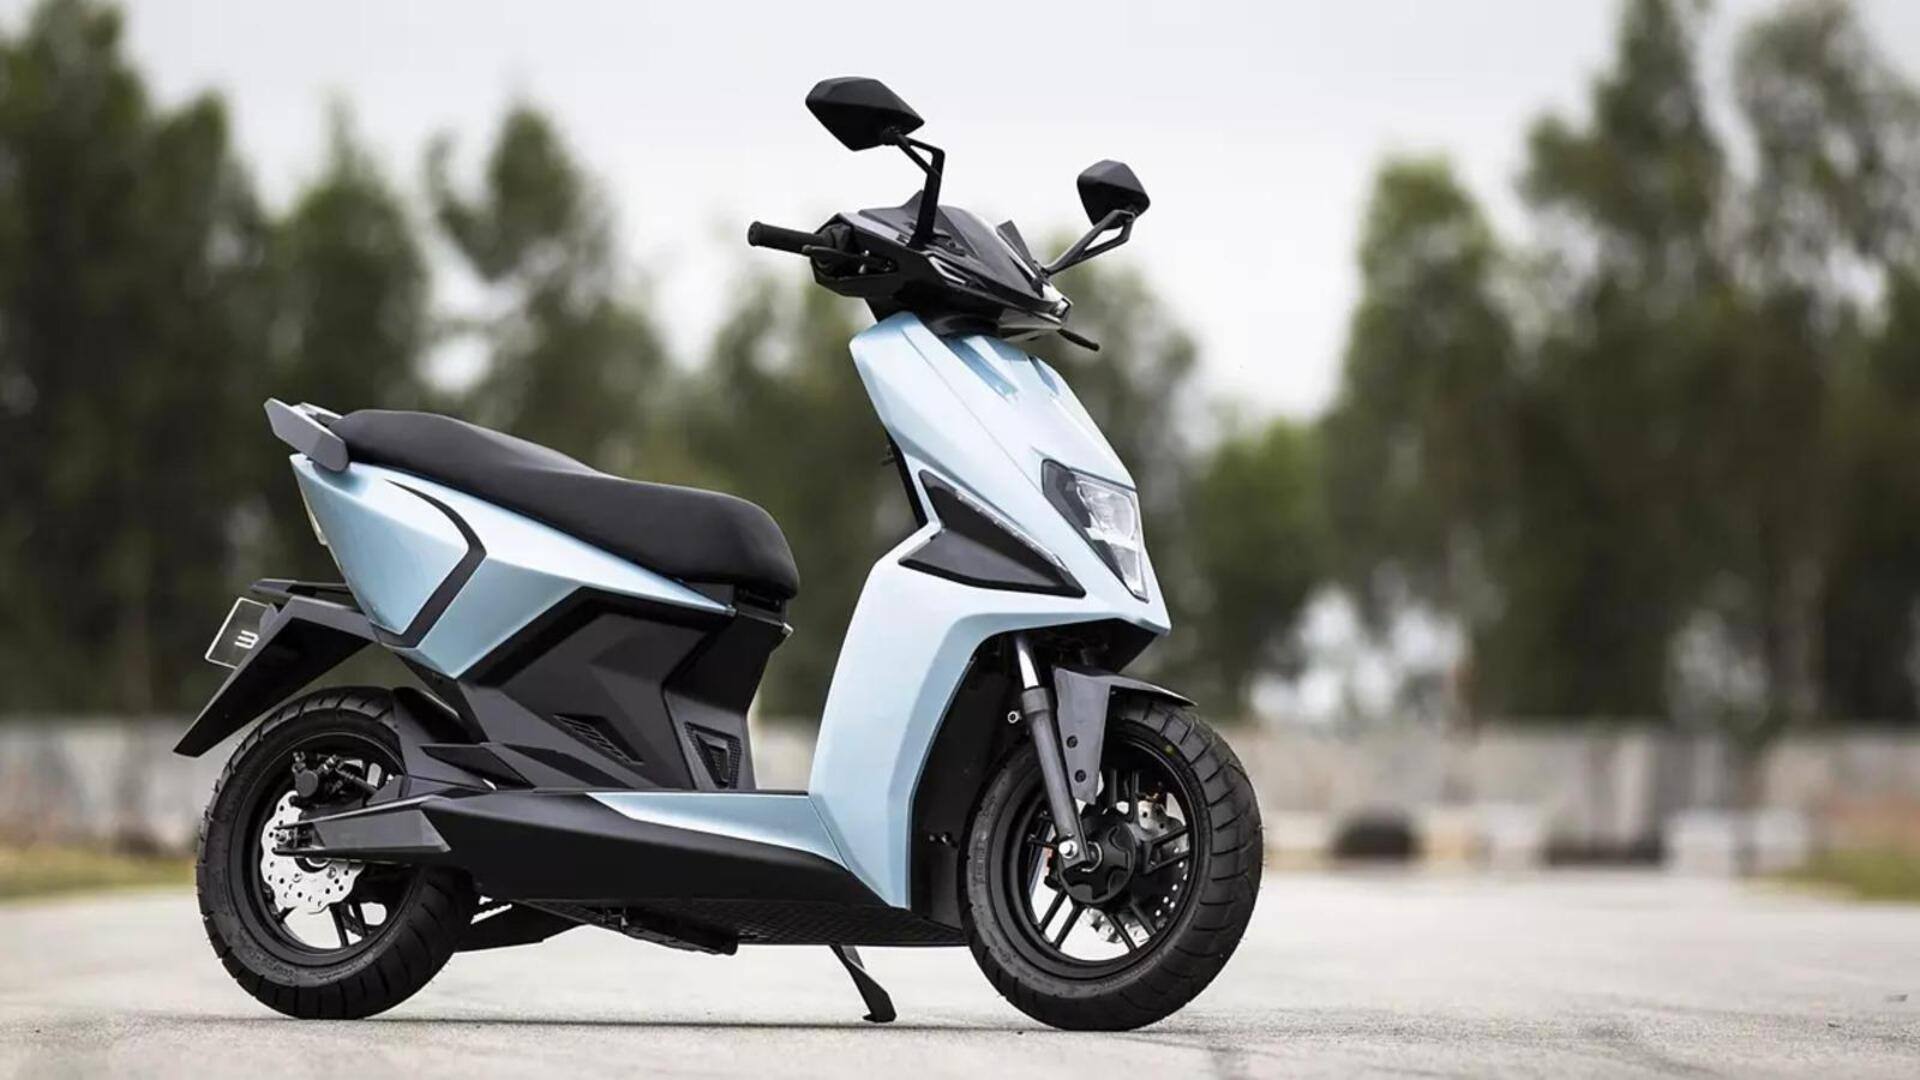 ARAI initiates crash tests on electric scooters in India